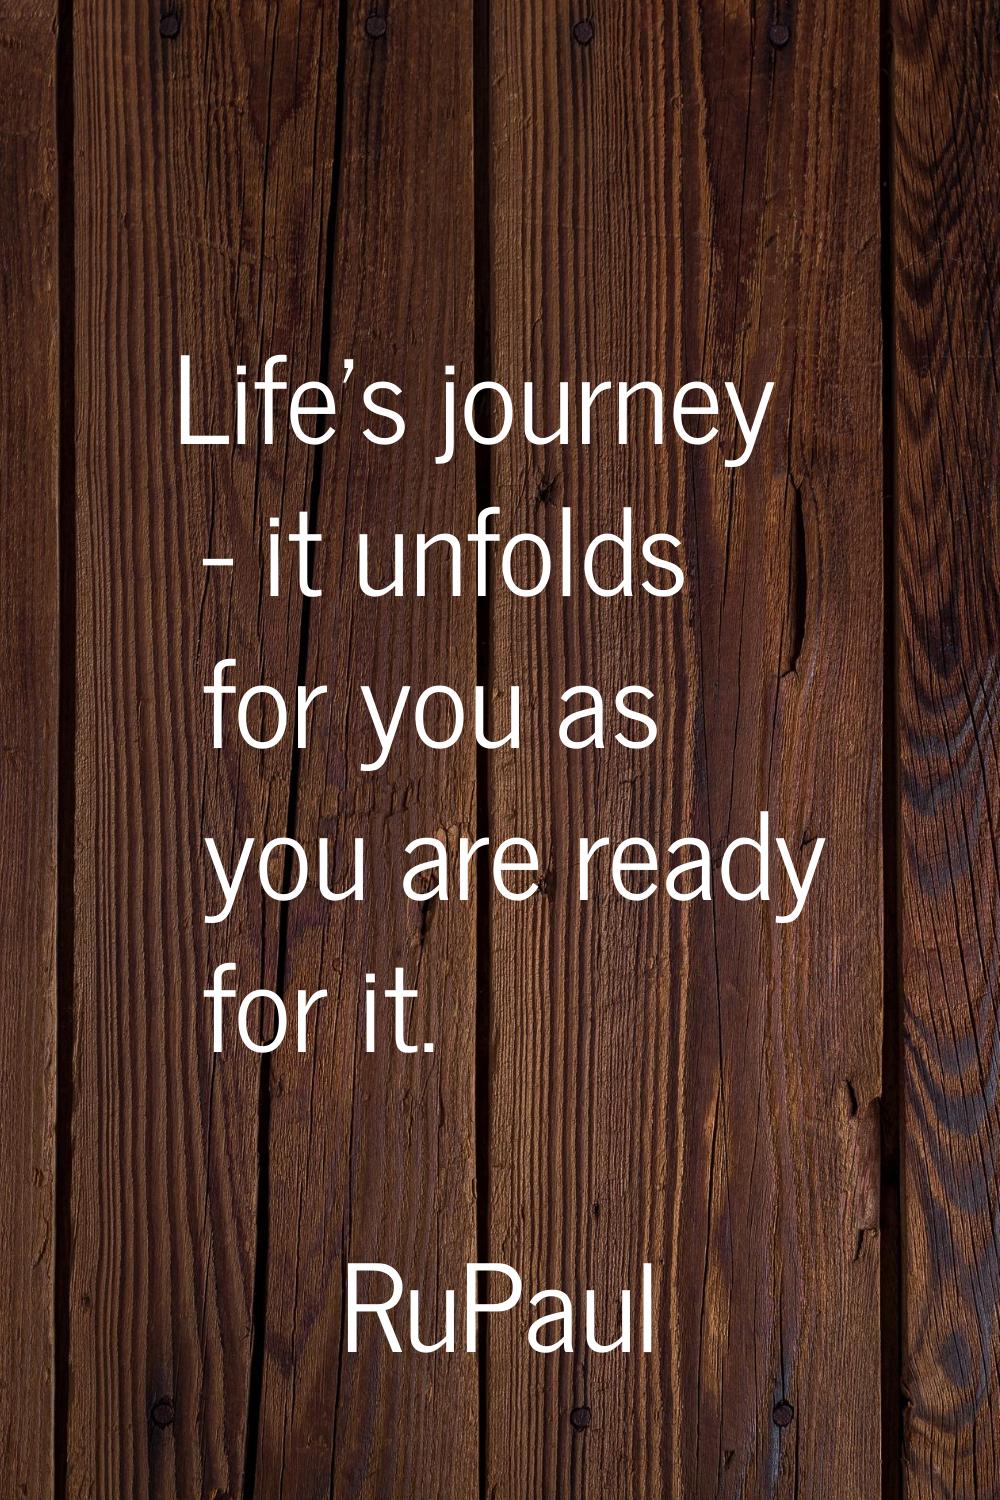 Life's journey - it unfolds for you as you are ready for it.